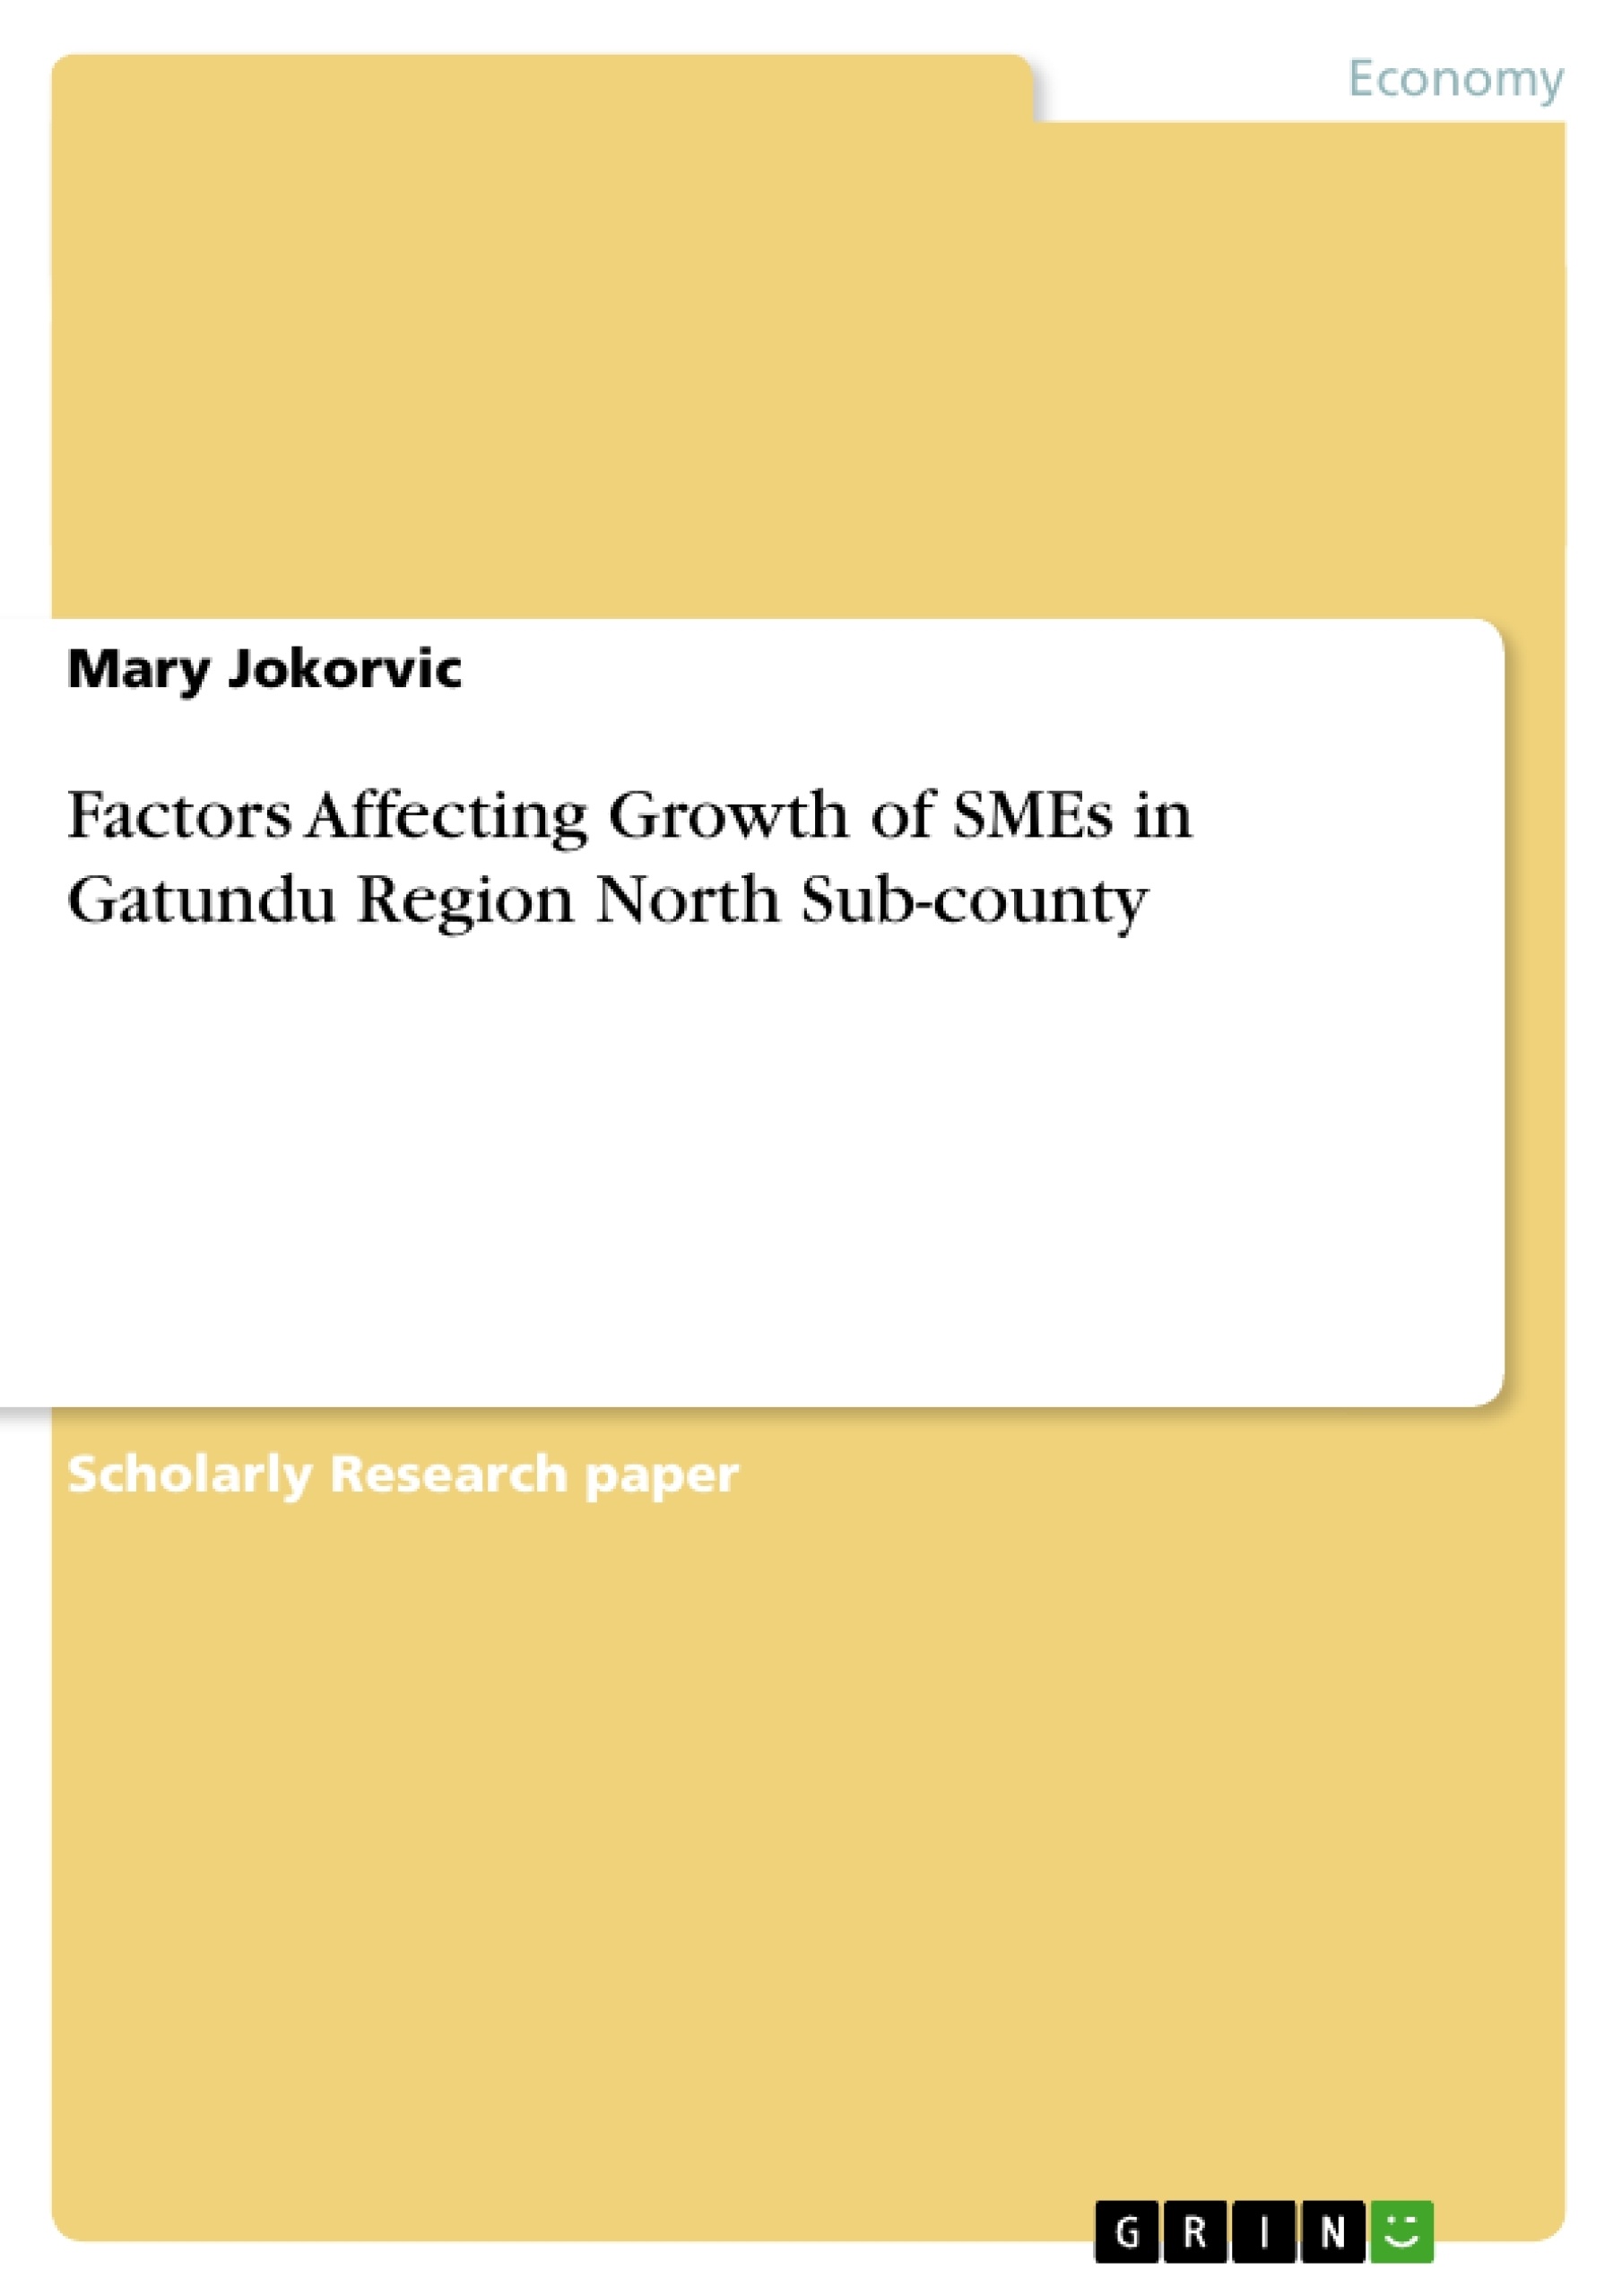 Title: Factors Affecting Growth of SMEs in Gatundu Region North Sub-county